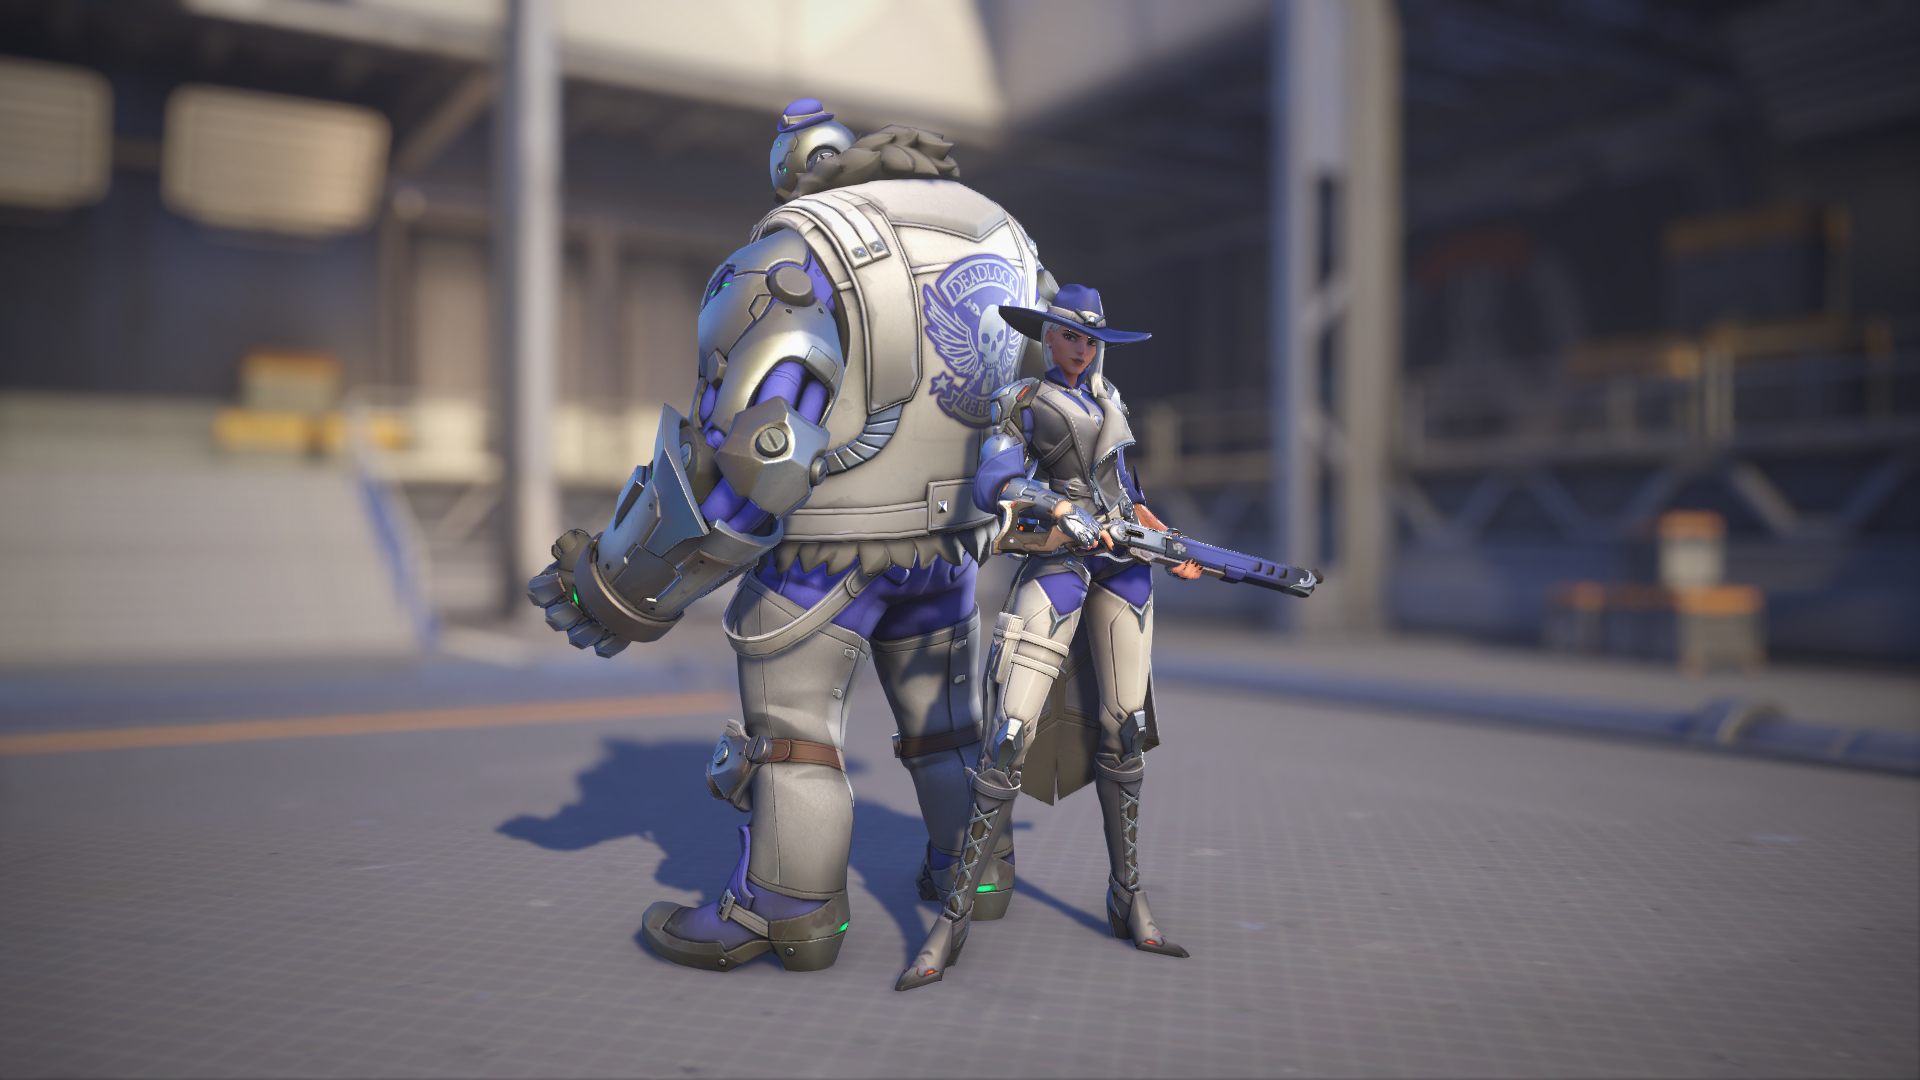 Ashe models her Tansy skin in Overwatch 2.